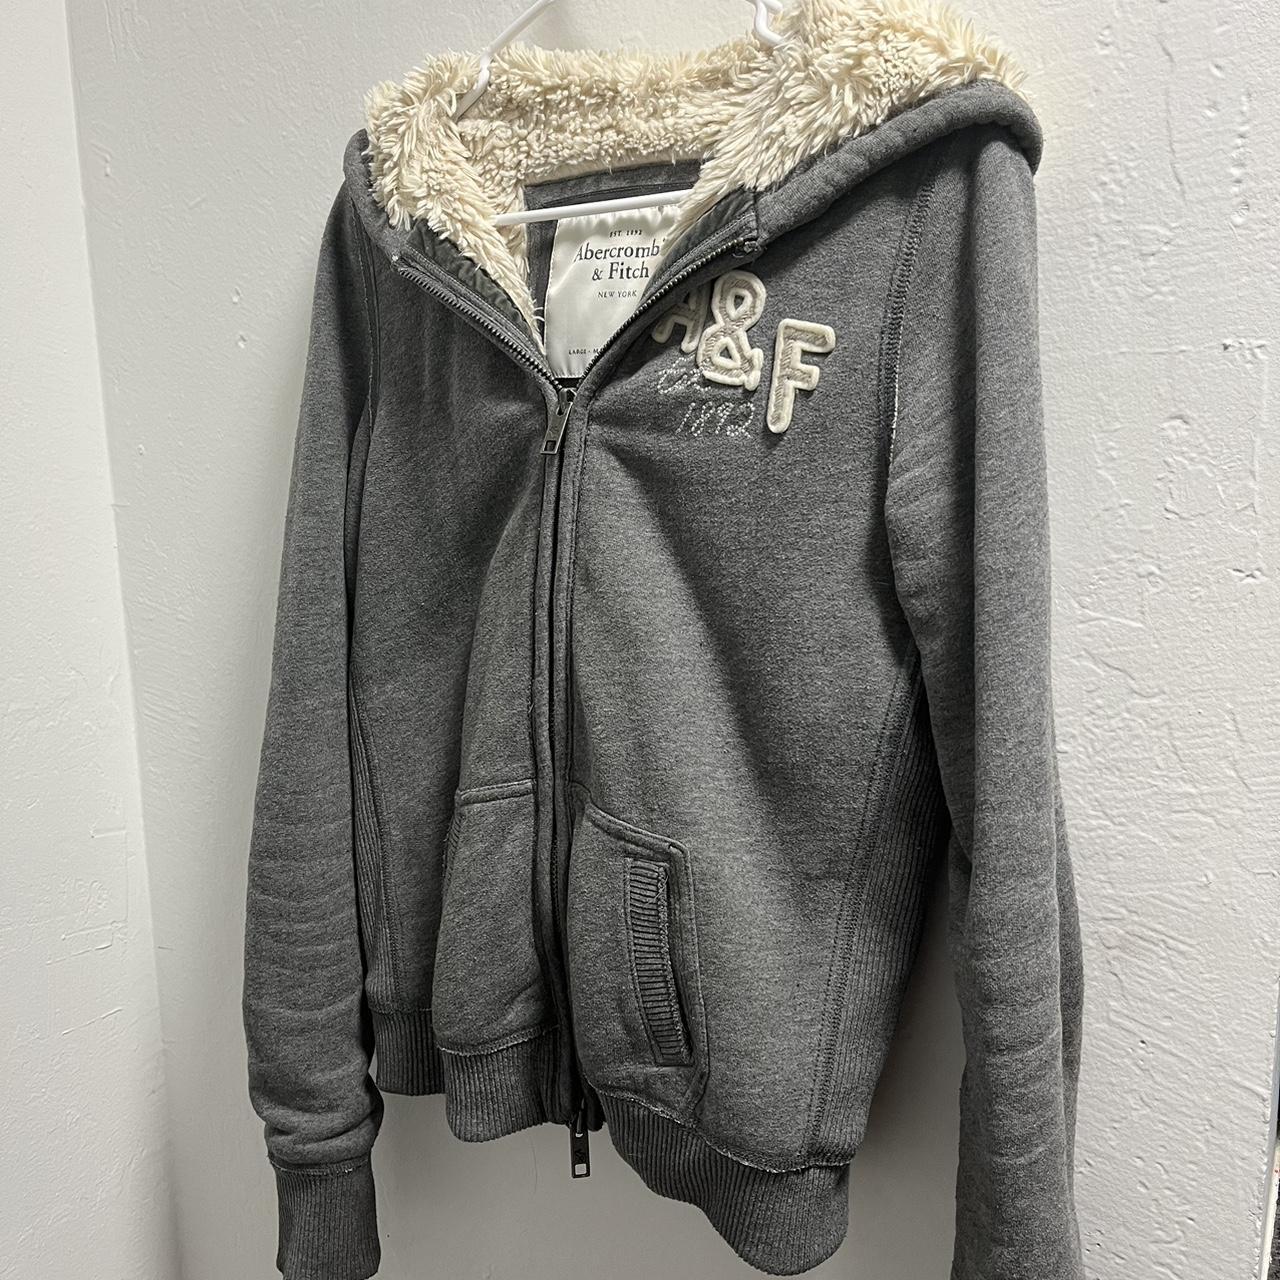 Abercrombie & Fitch Women's Grey and Cream Jacket